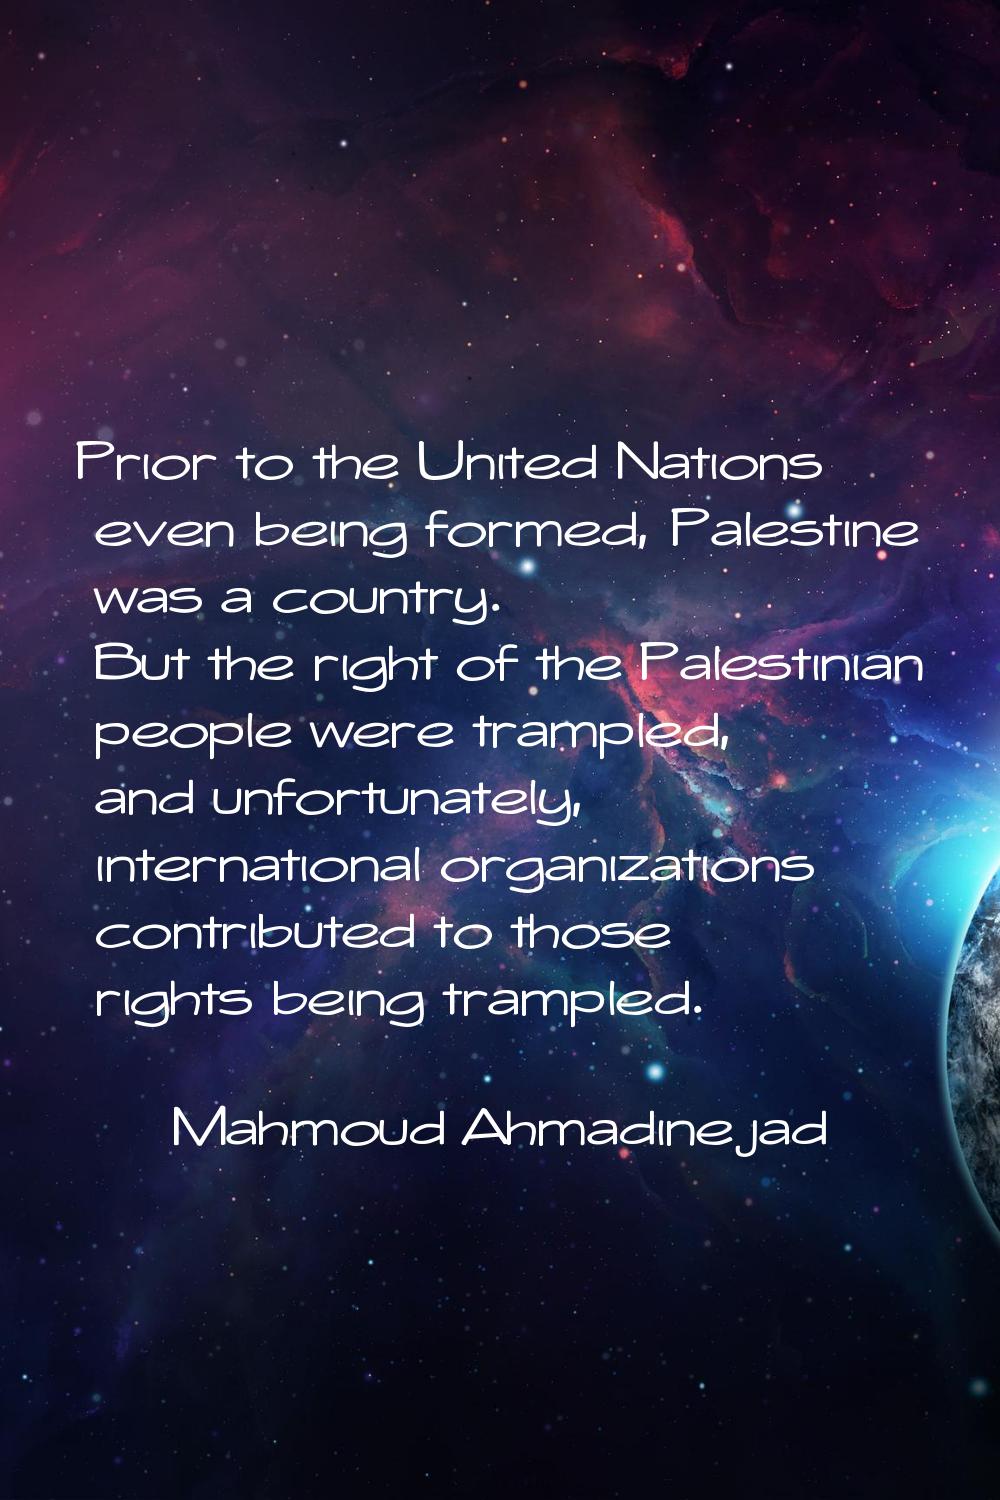 Prior to the United Nations even being formed, Palestine was a country. But the right of the Palest